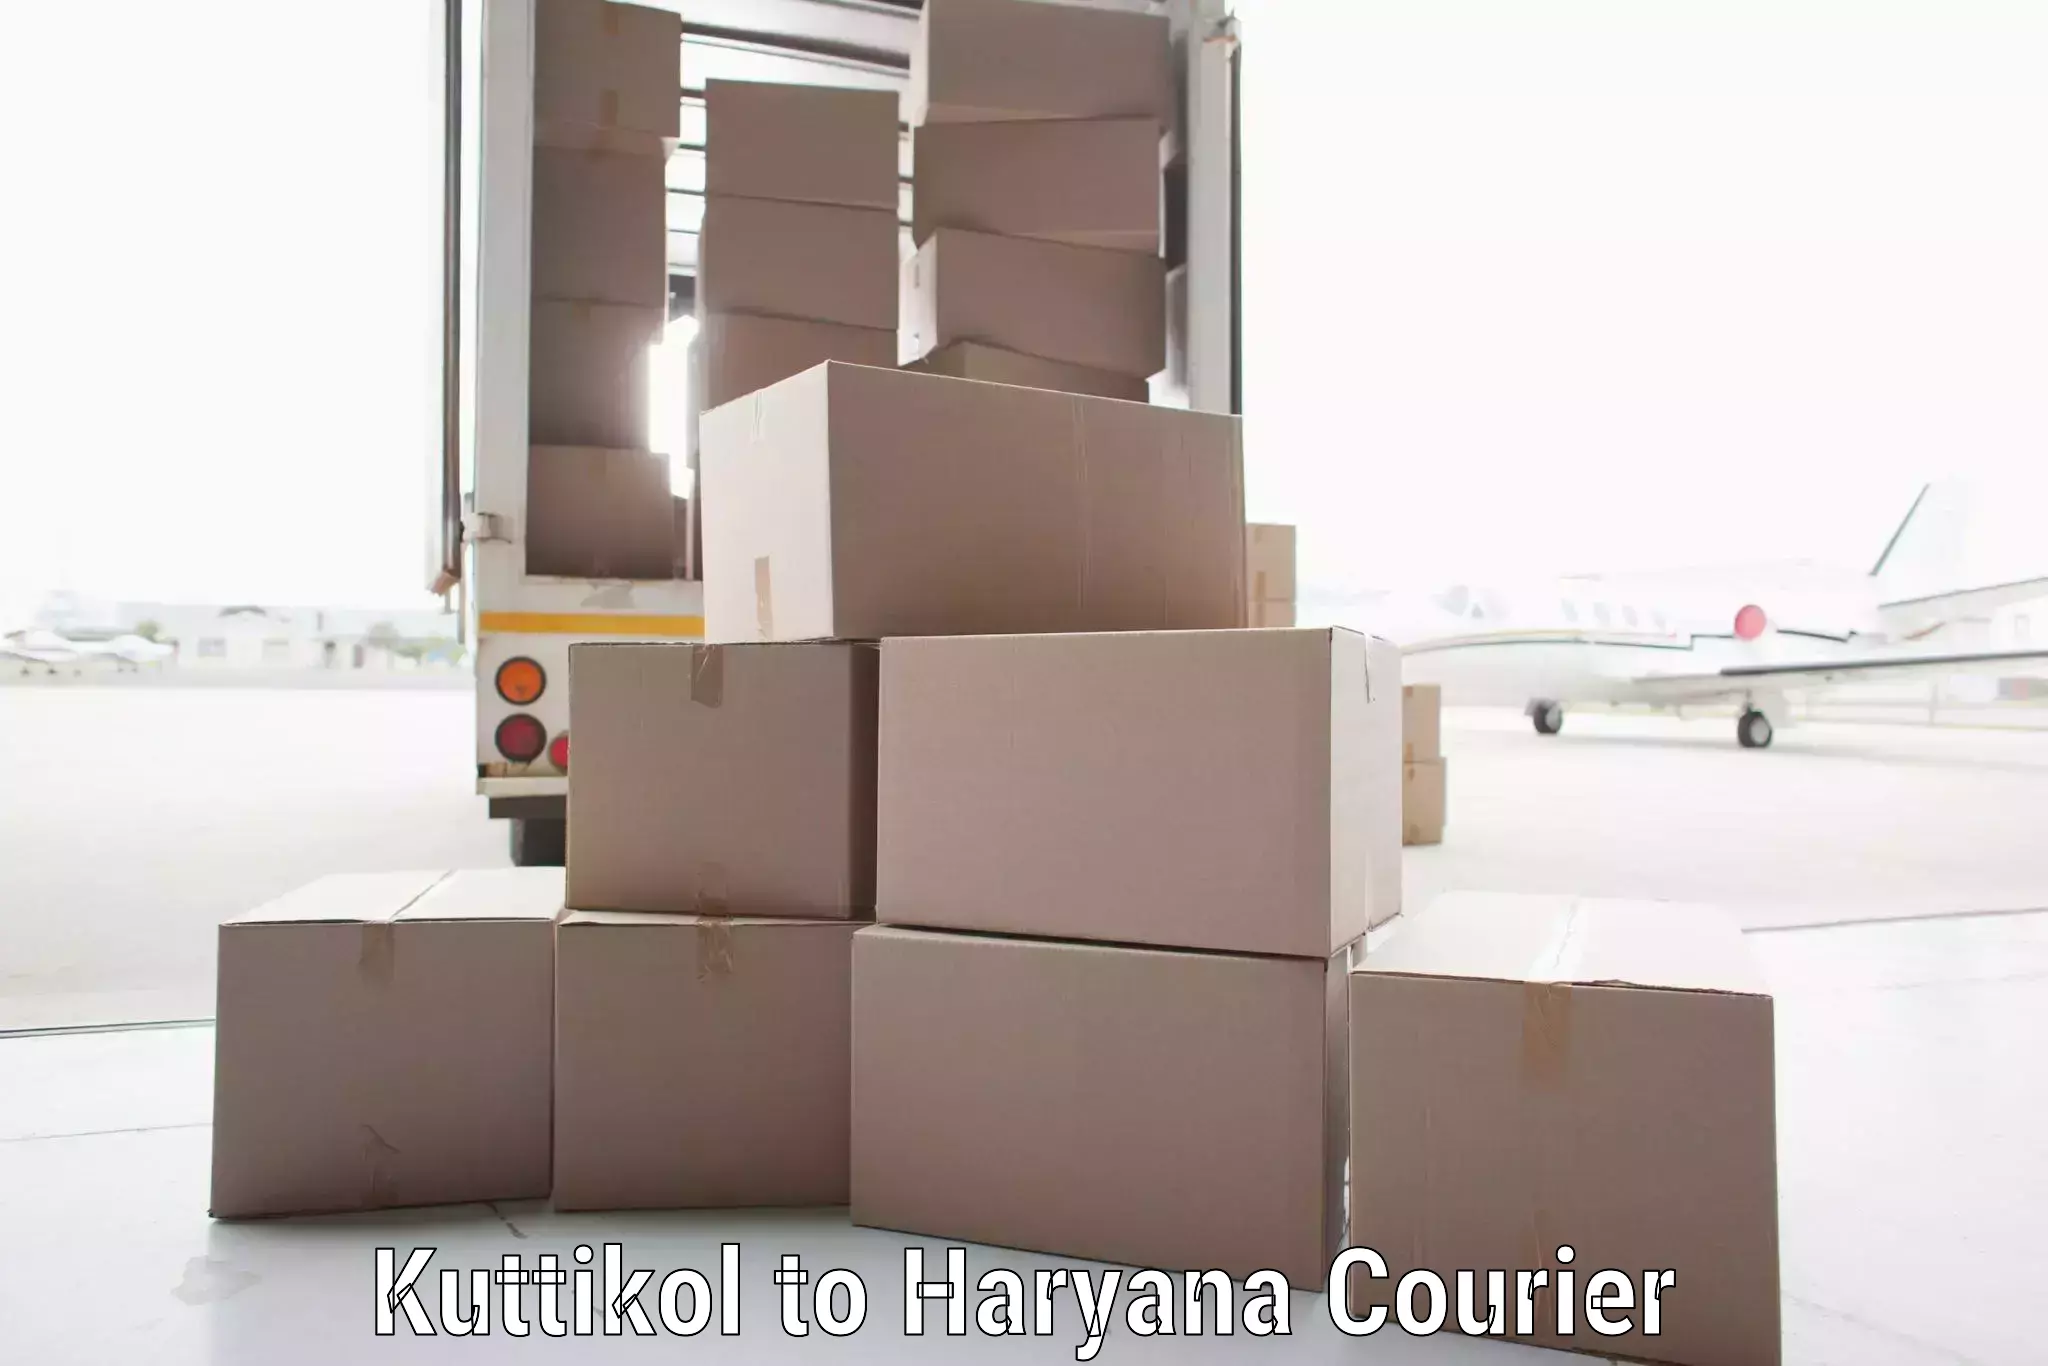 Local courier options Kuttikol to Gurgaon